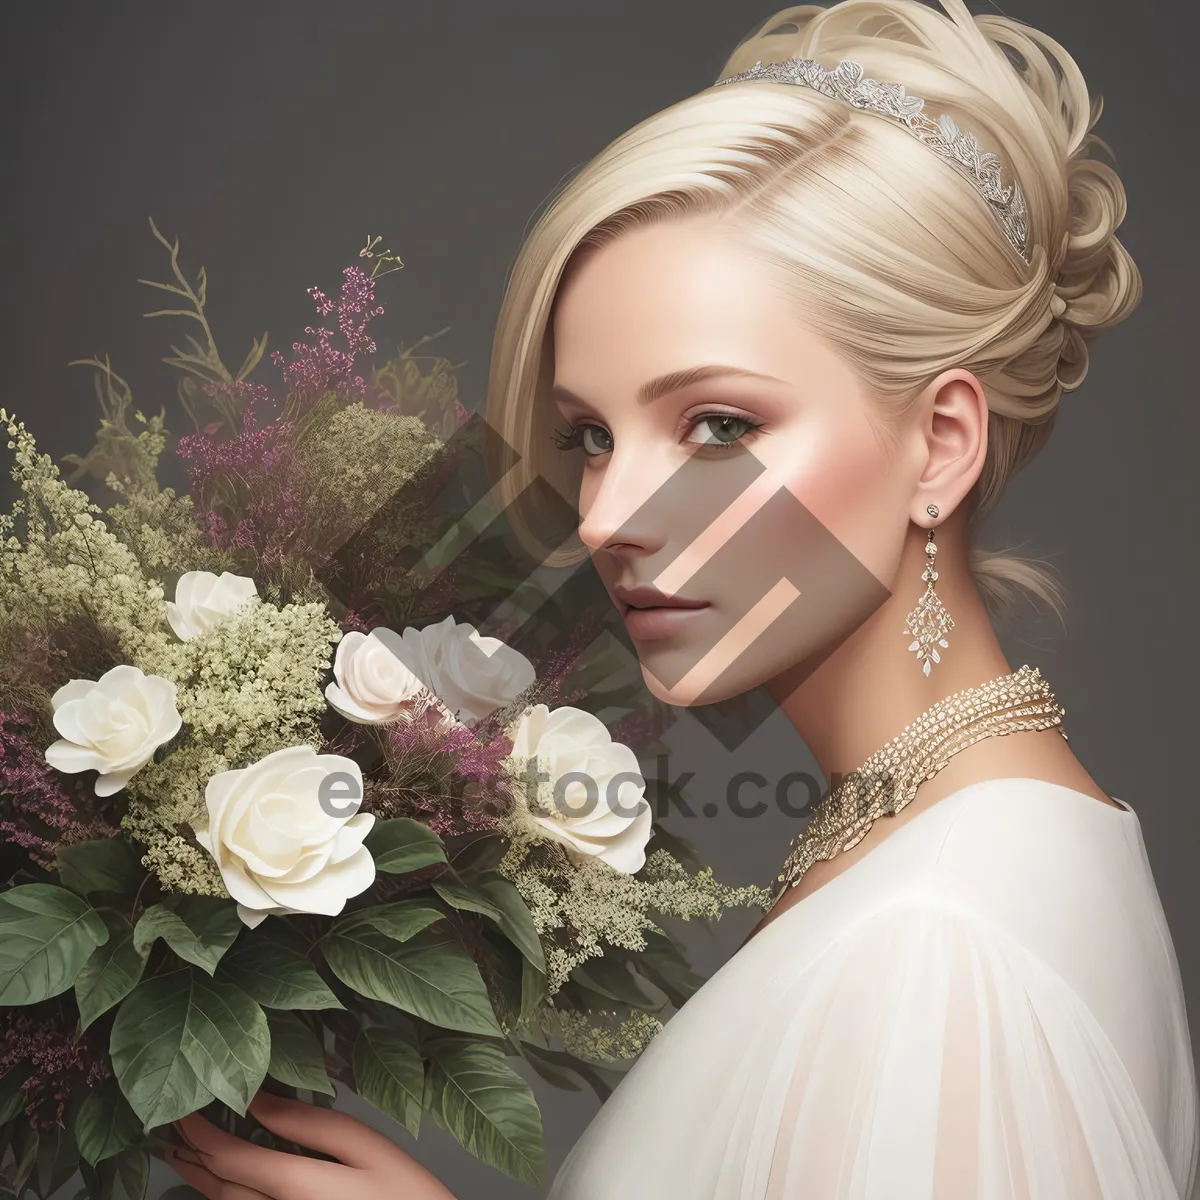 Picture of Sacred Beauty: Spiritual Bride with Graceful Bouquet